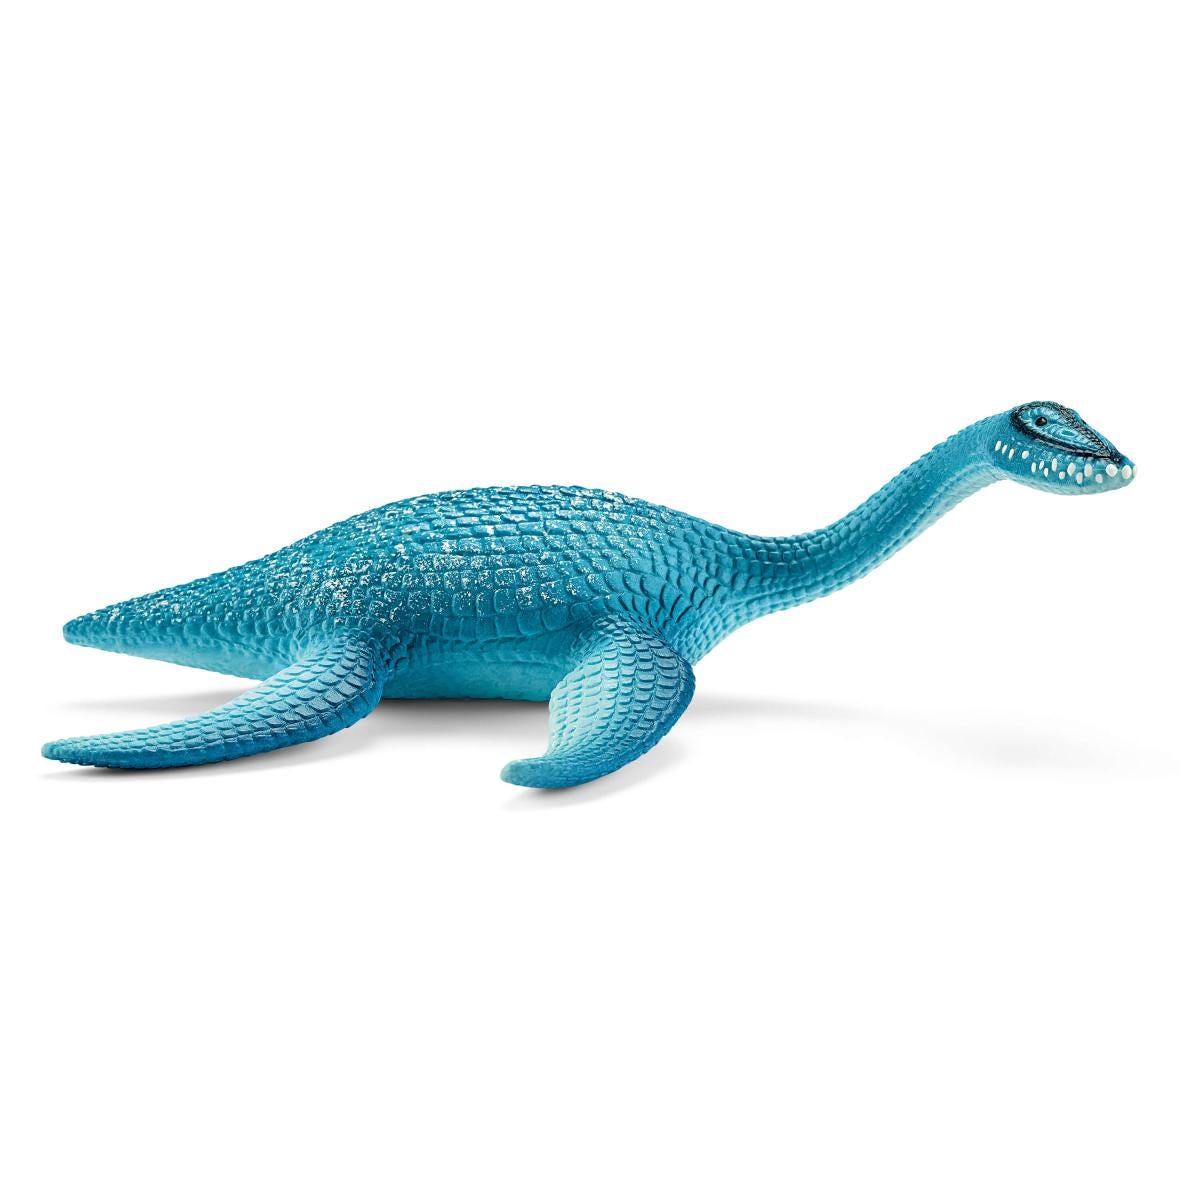 Schleich Conquering the Earth Dinosaurs  Plesiosaurus #15016 New for 2019 